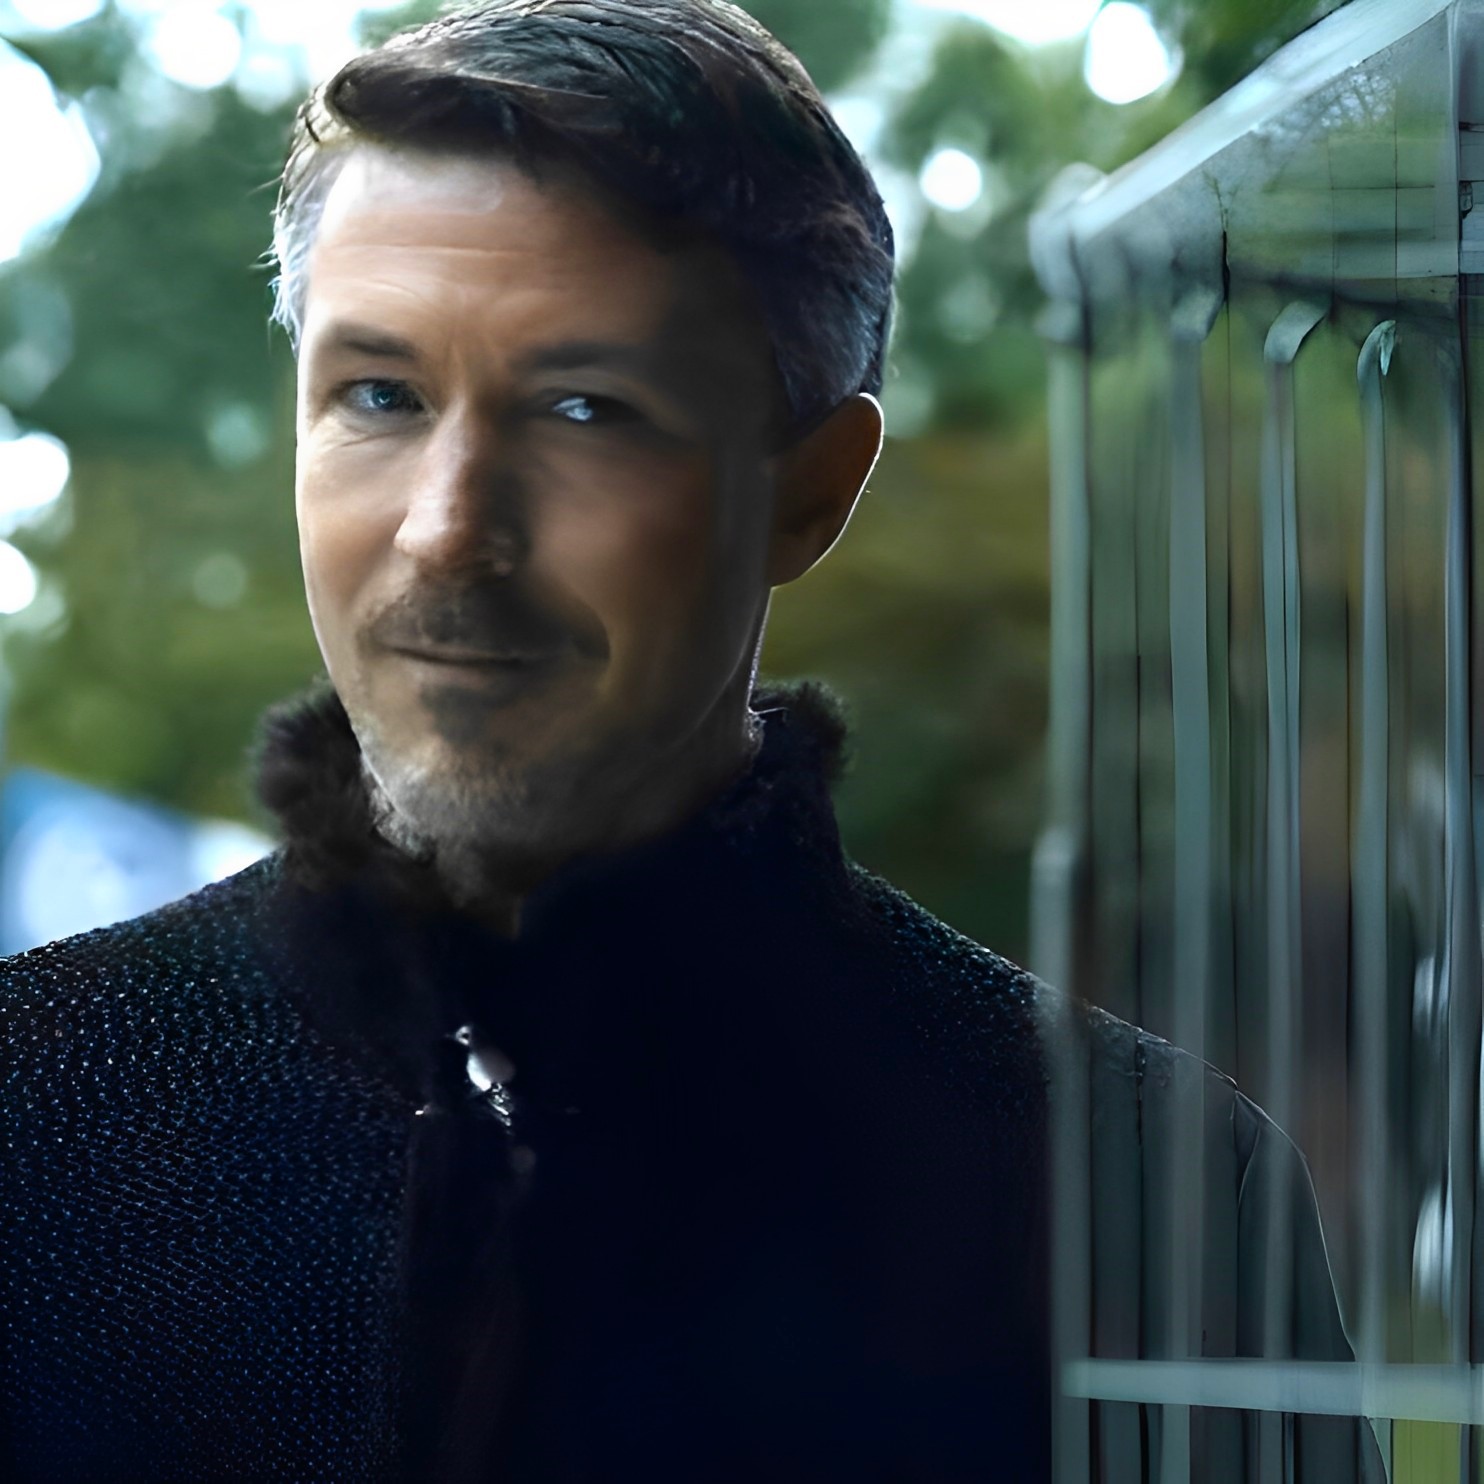 Aidan Gillen A Captivating Collection Of Photos Showcasing The Versatility And Charisma Of A 